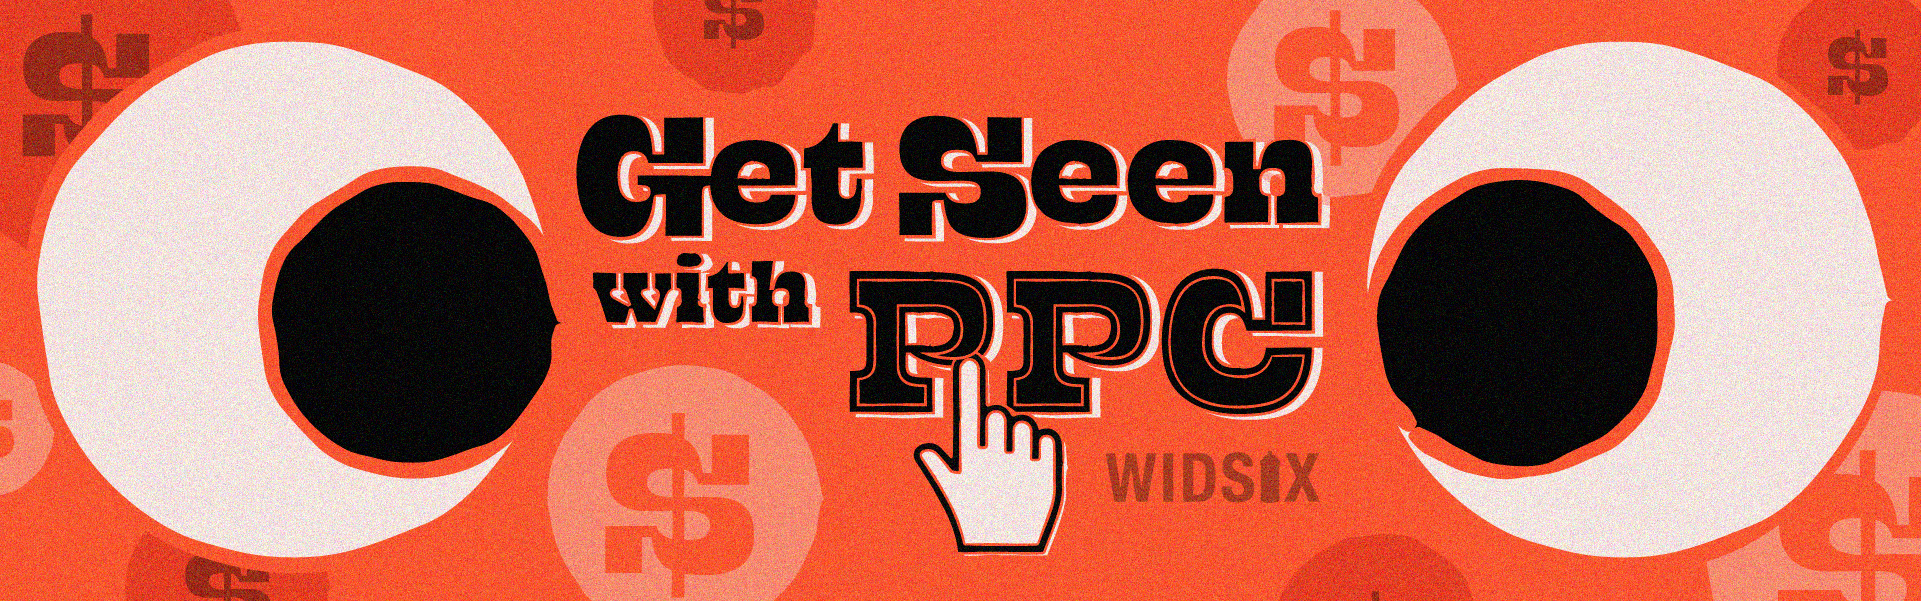 Get Seen With PPC - Google Ads, Paid Media & Digital Marketing